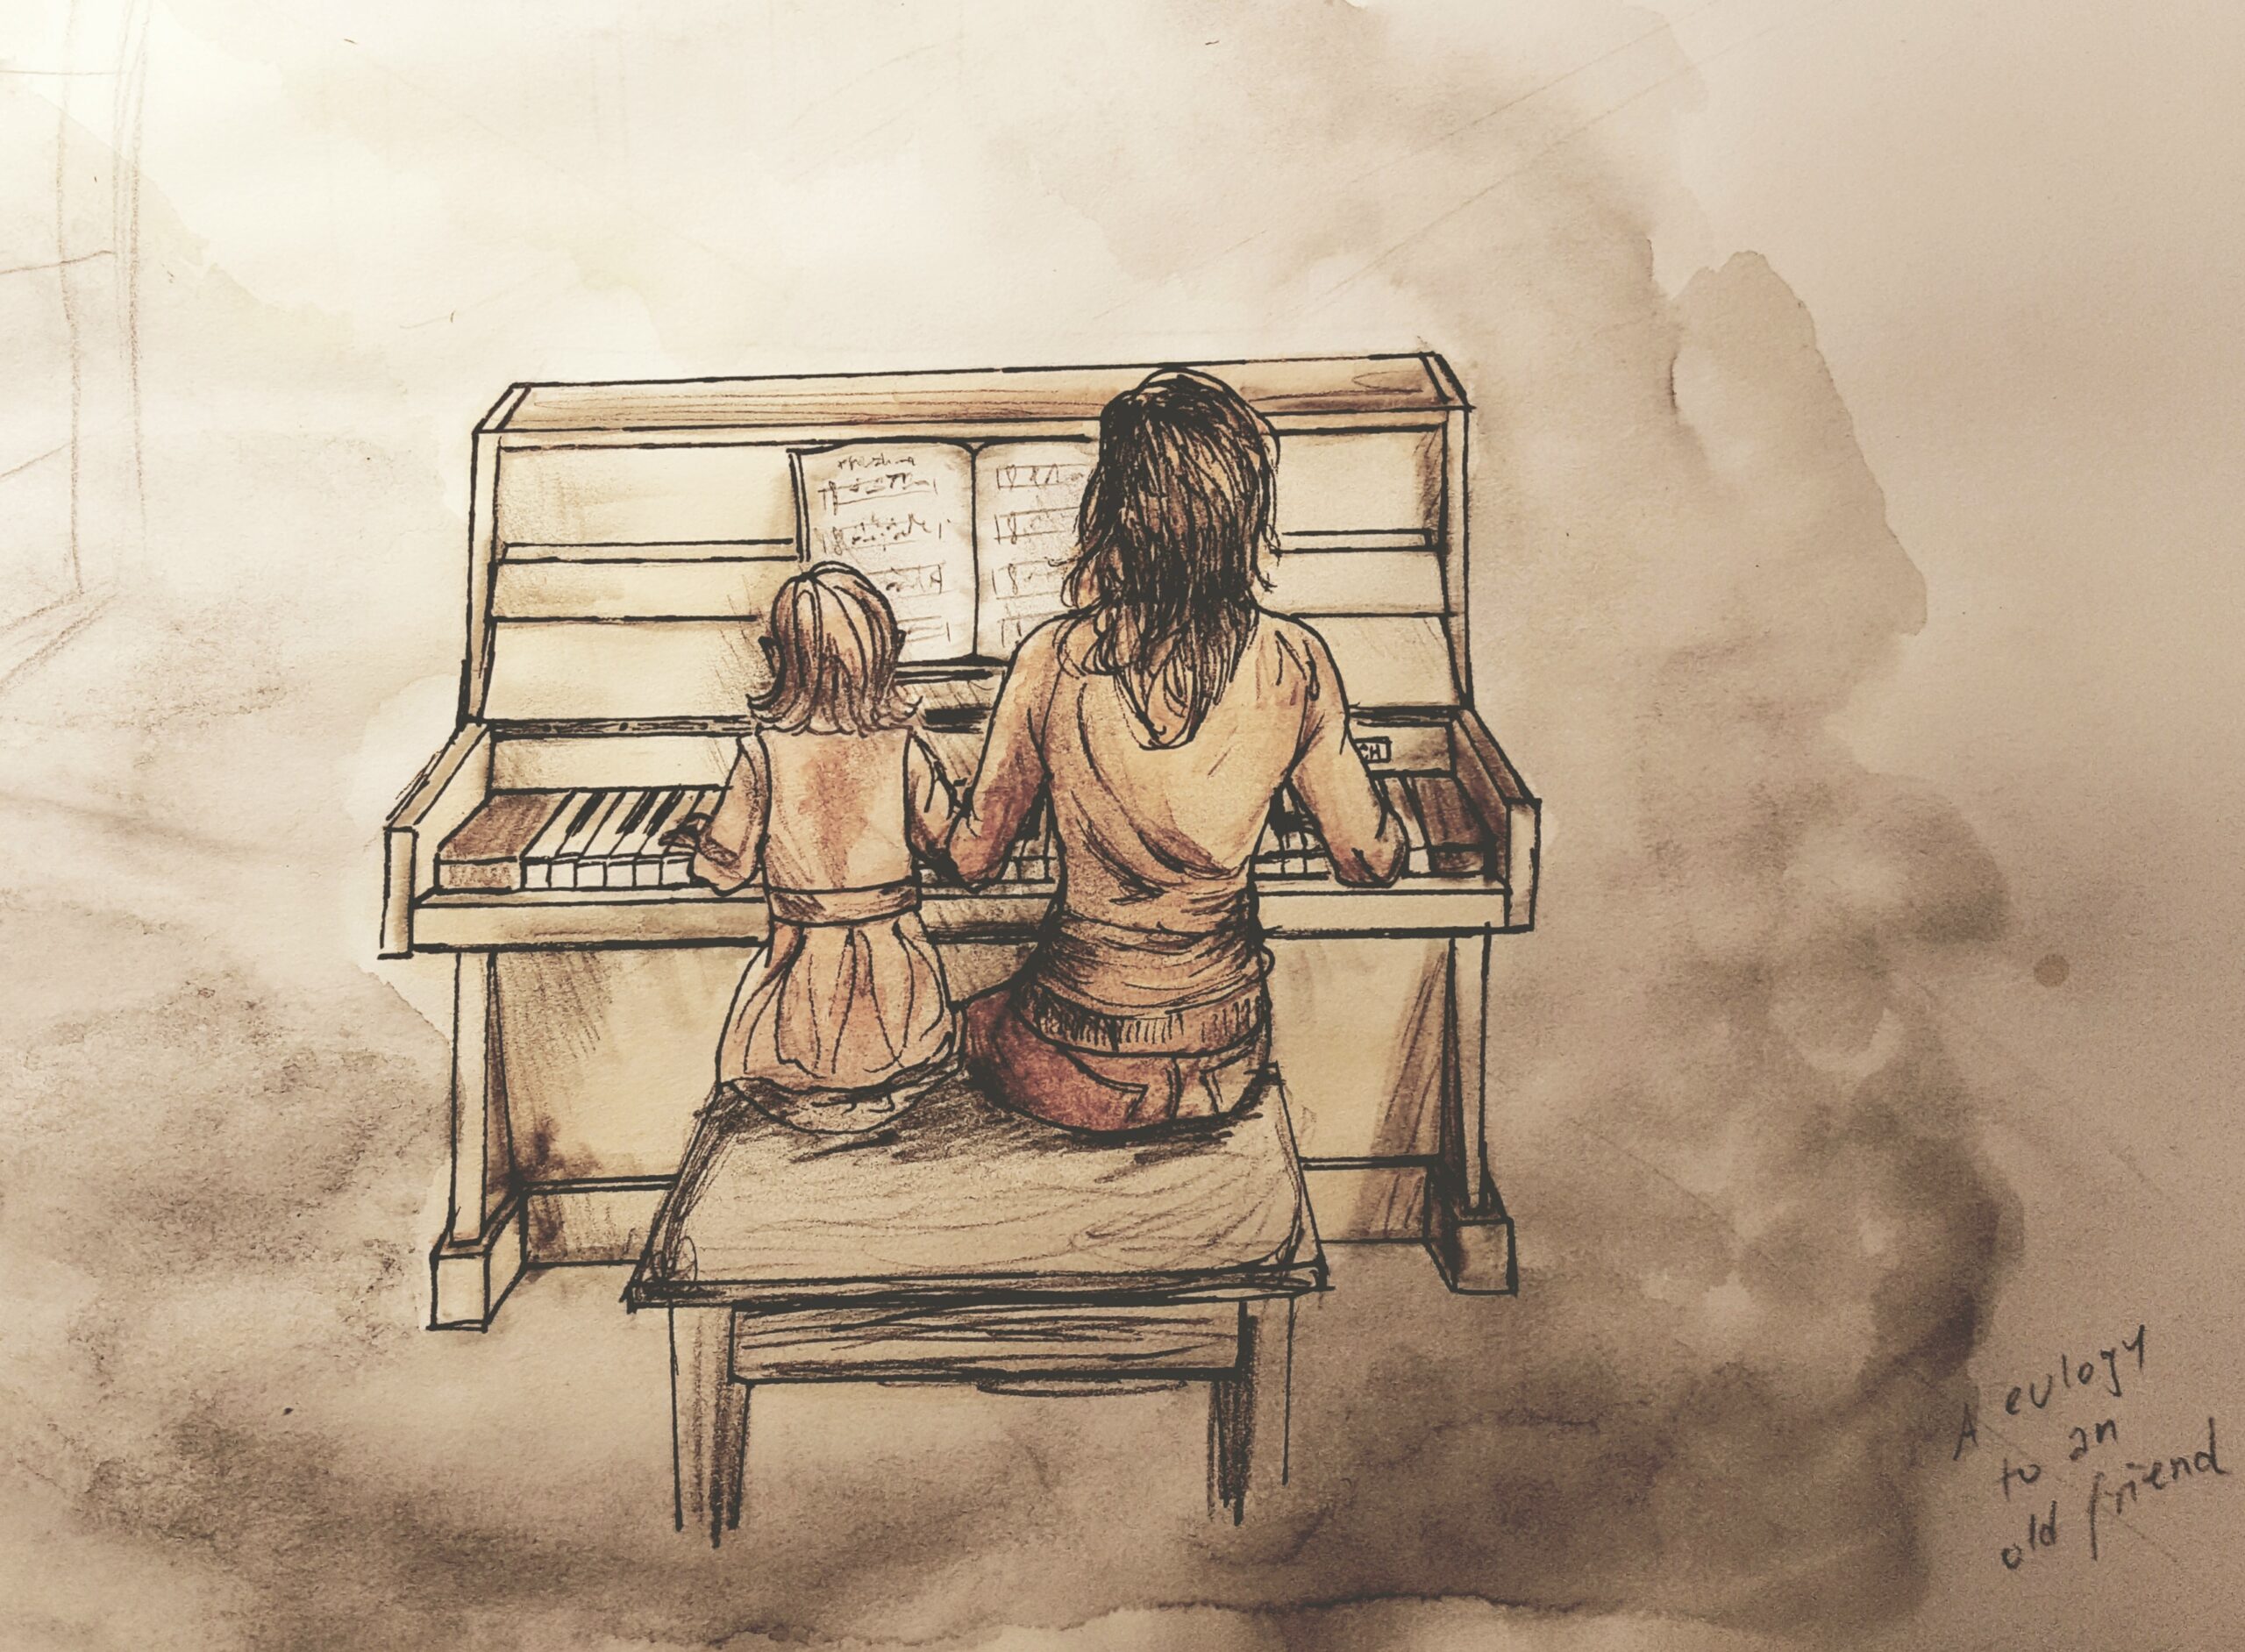 Illustration of two figures playing piano a young girl and a woman